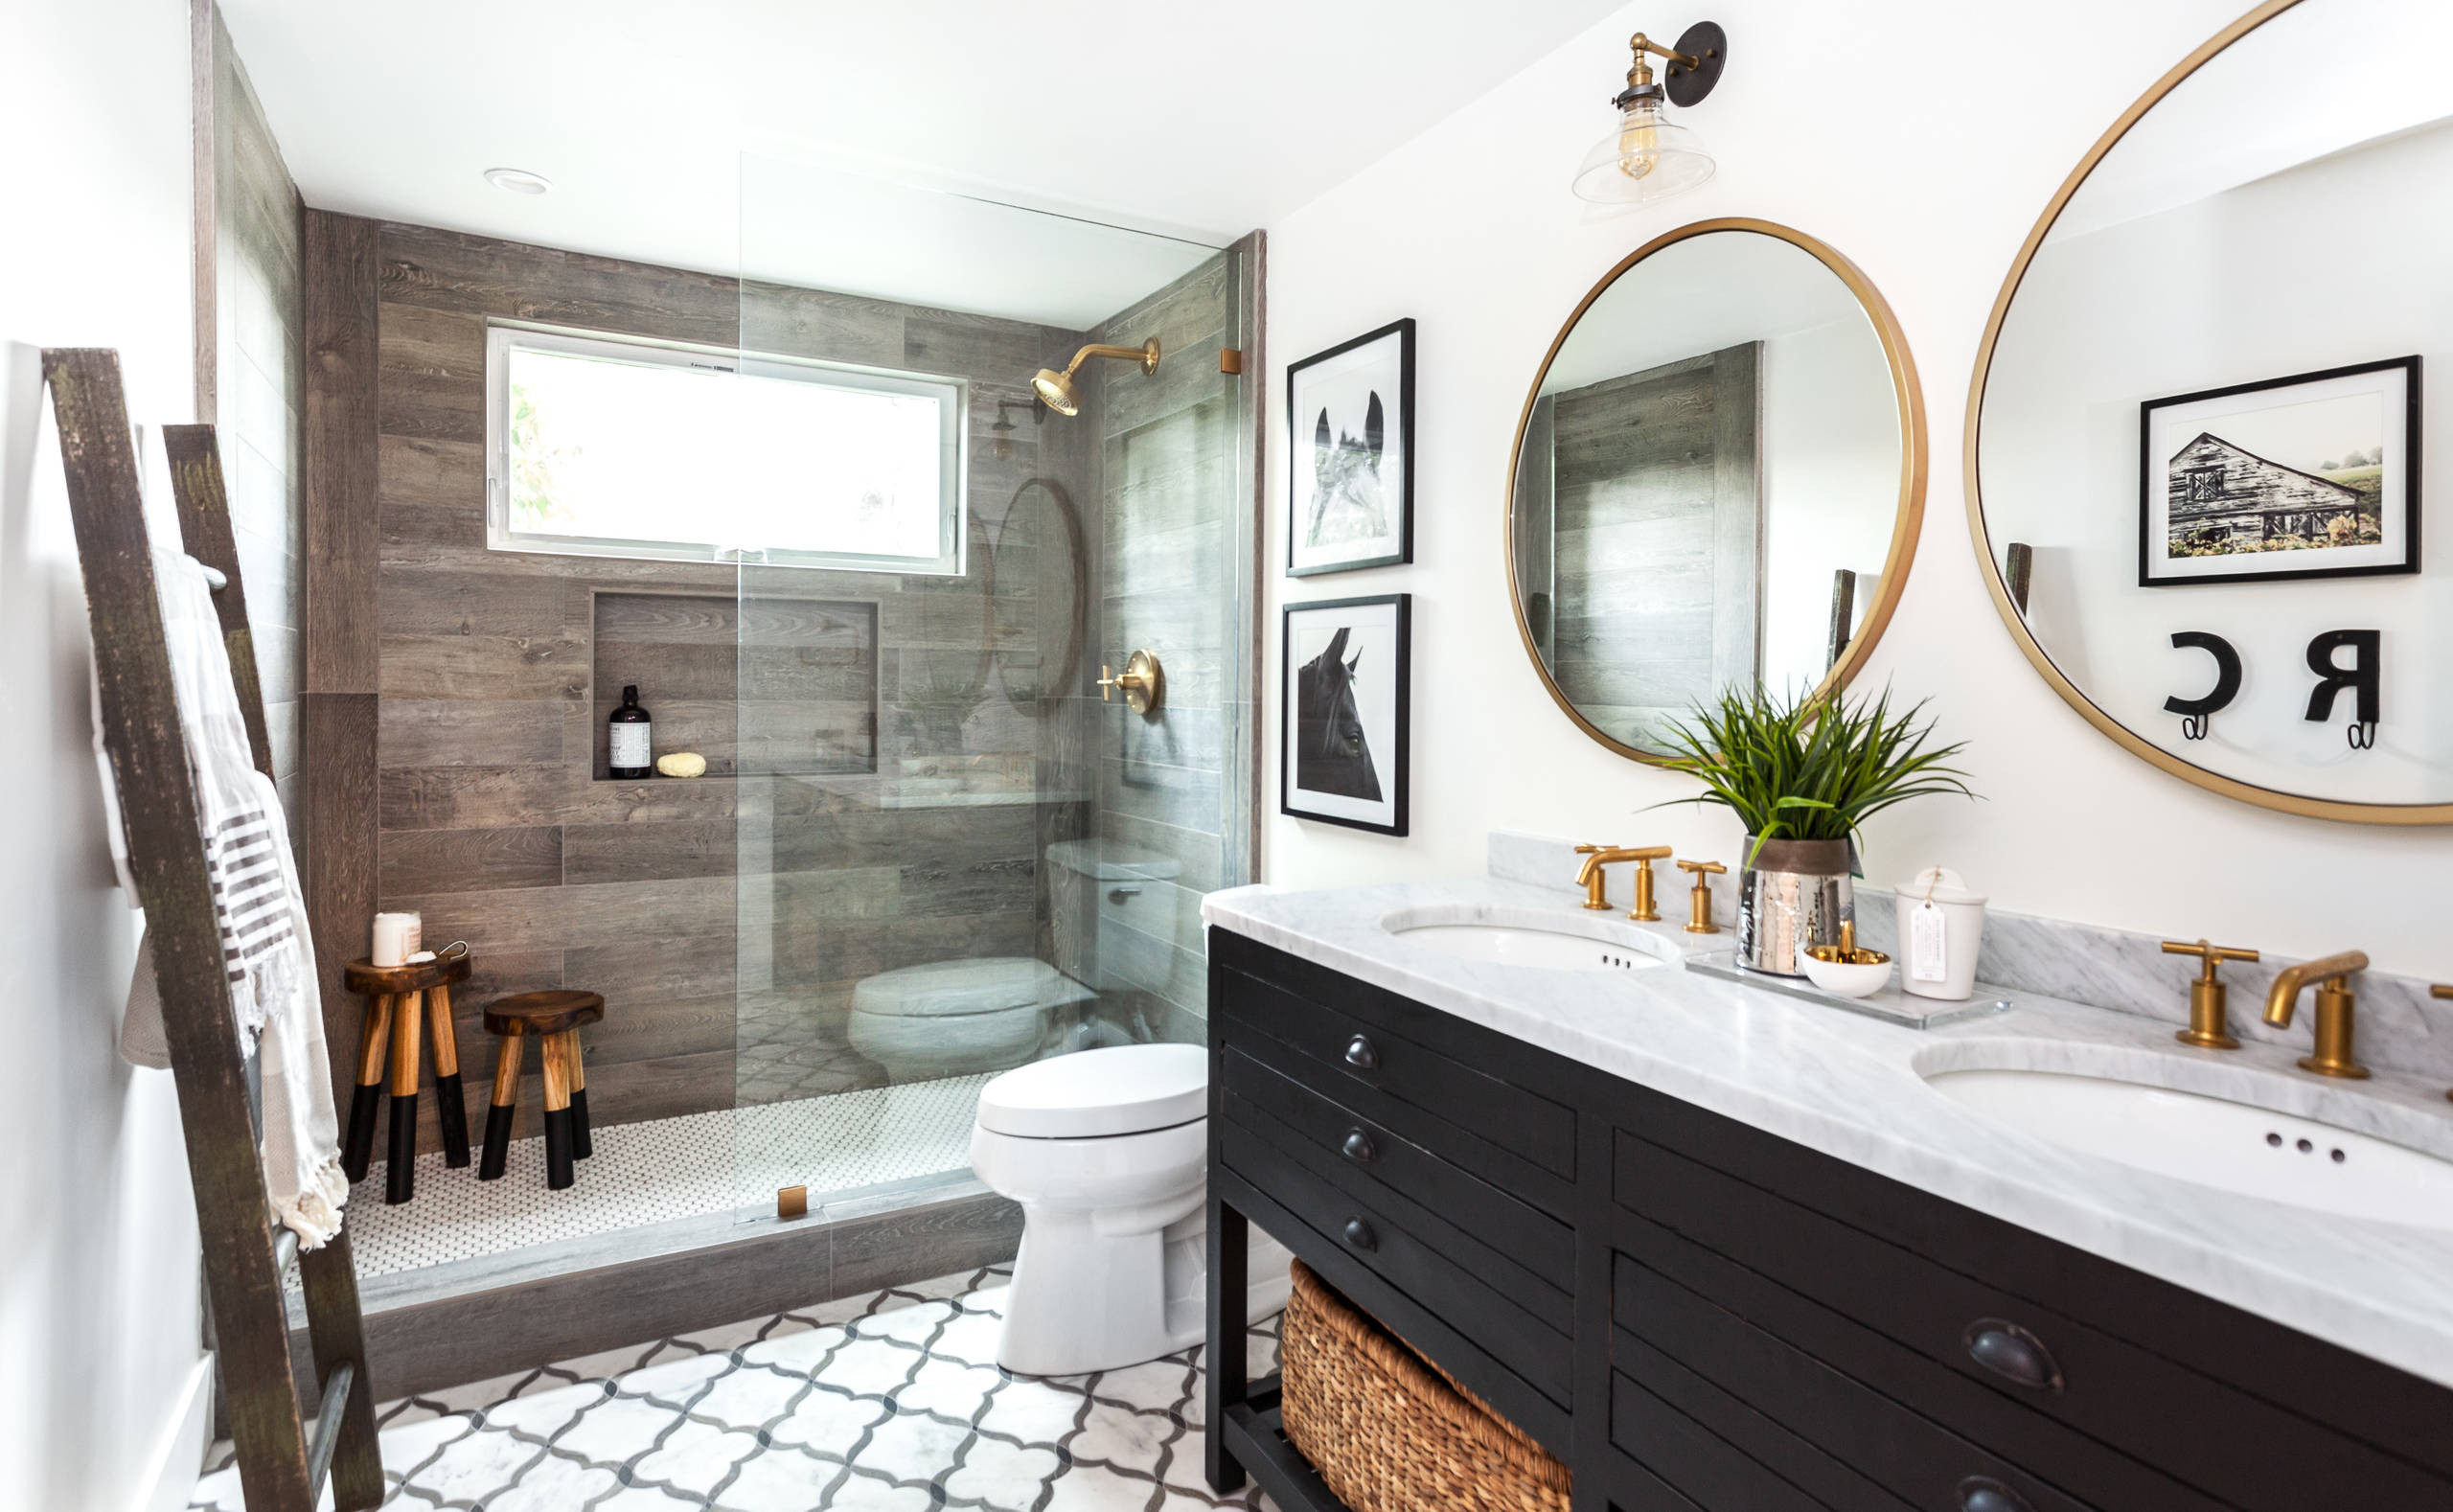 Bathroom Remodel Ideas 2020
 2020 Tips and Tricks for Your Best Bathroom Remodel Yet